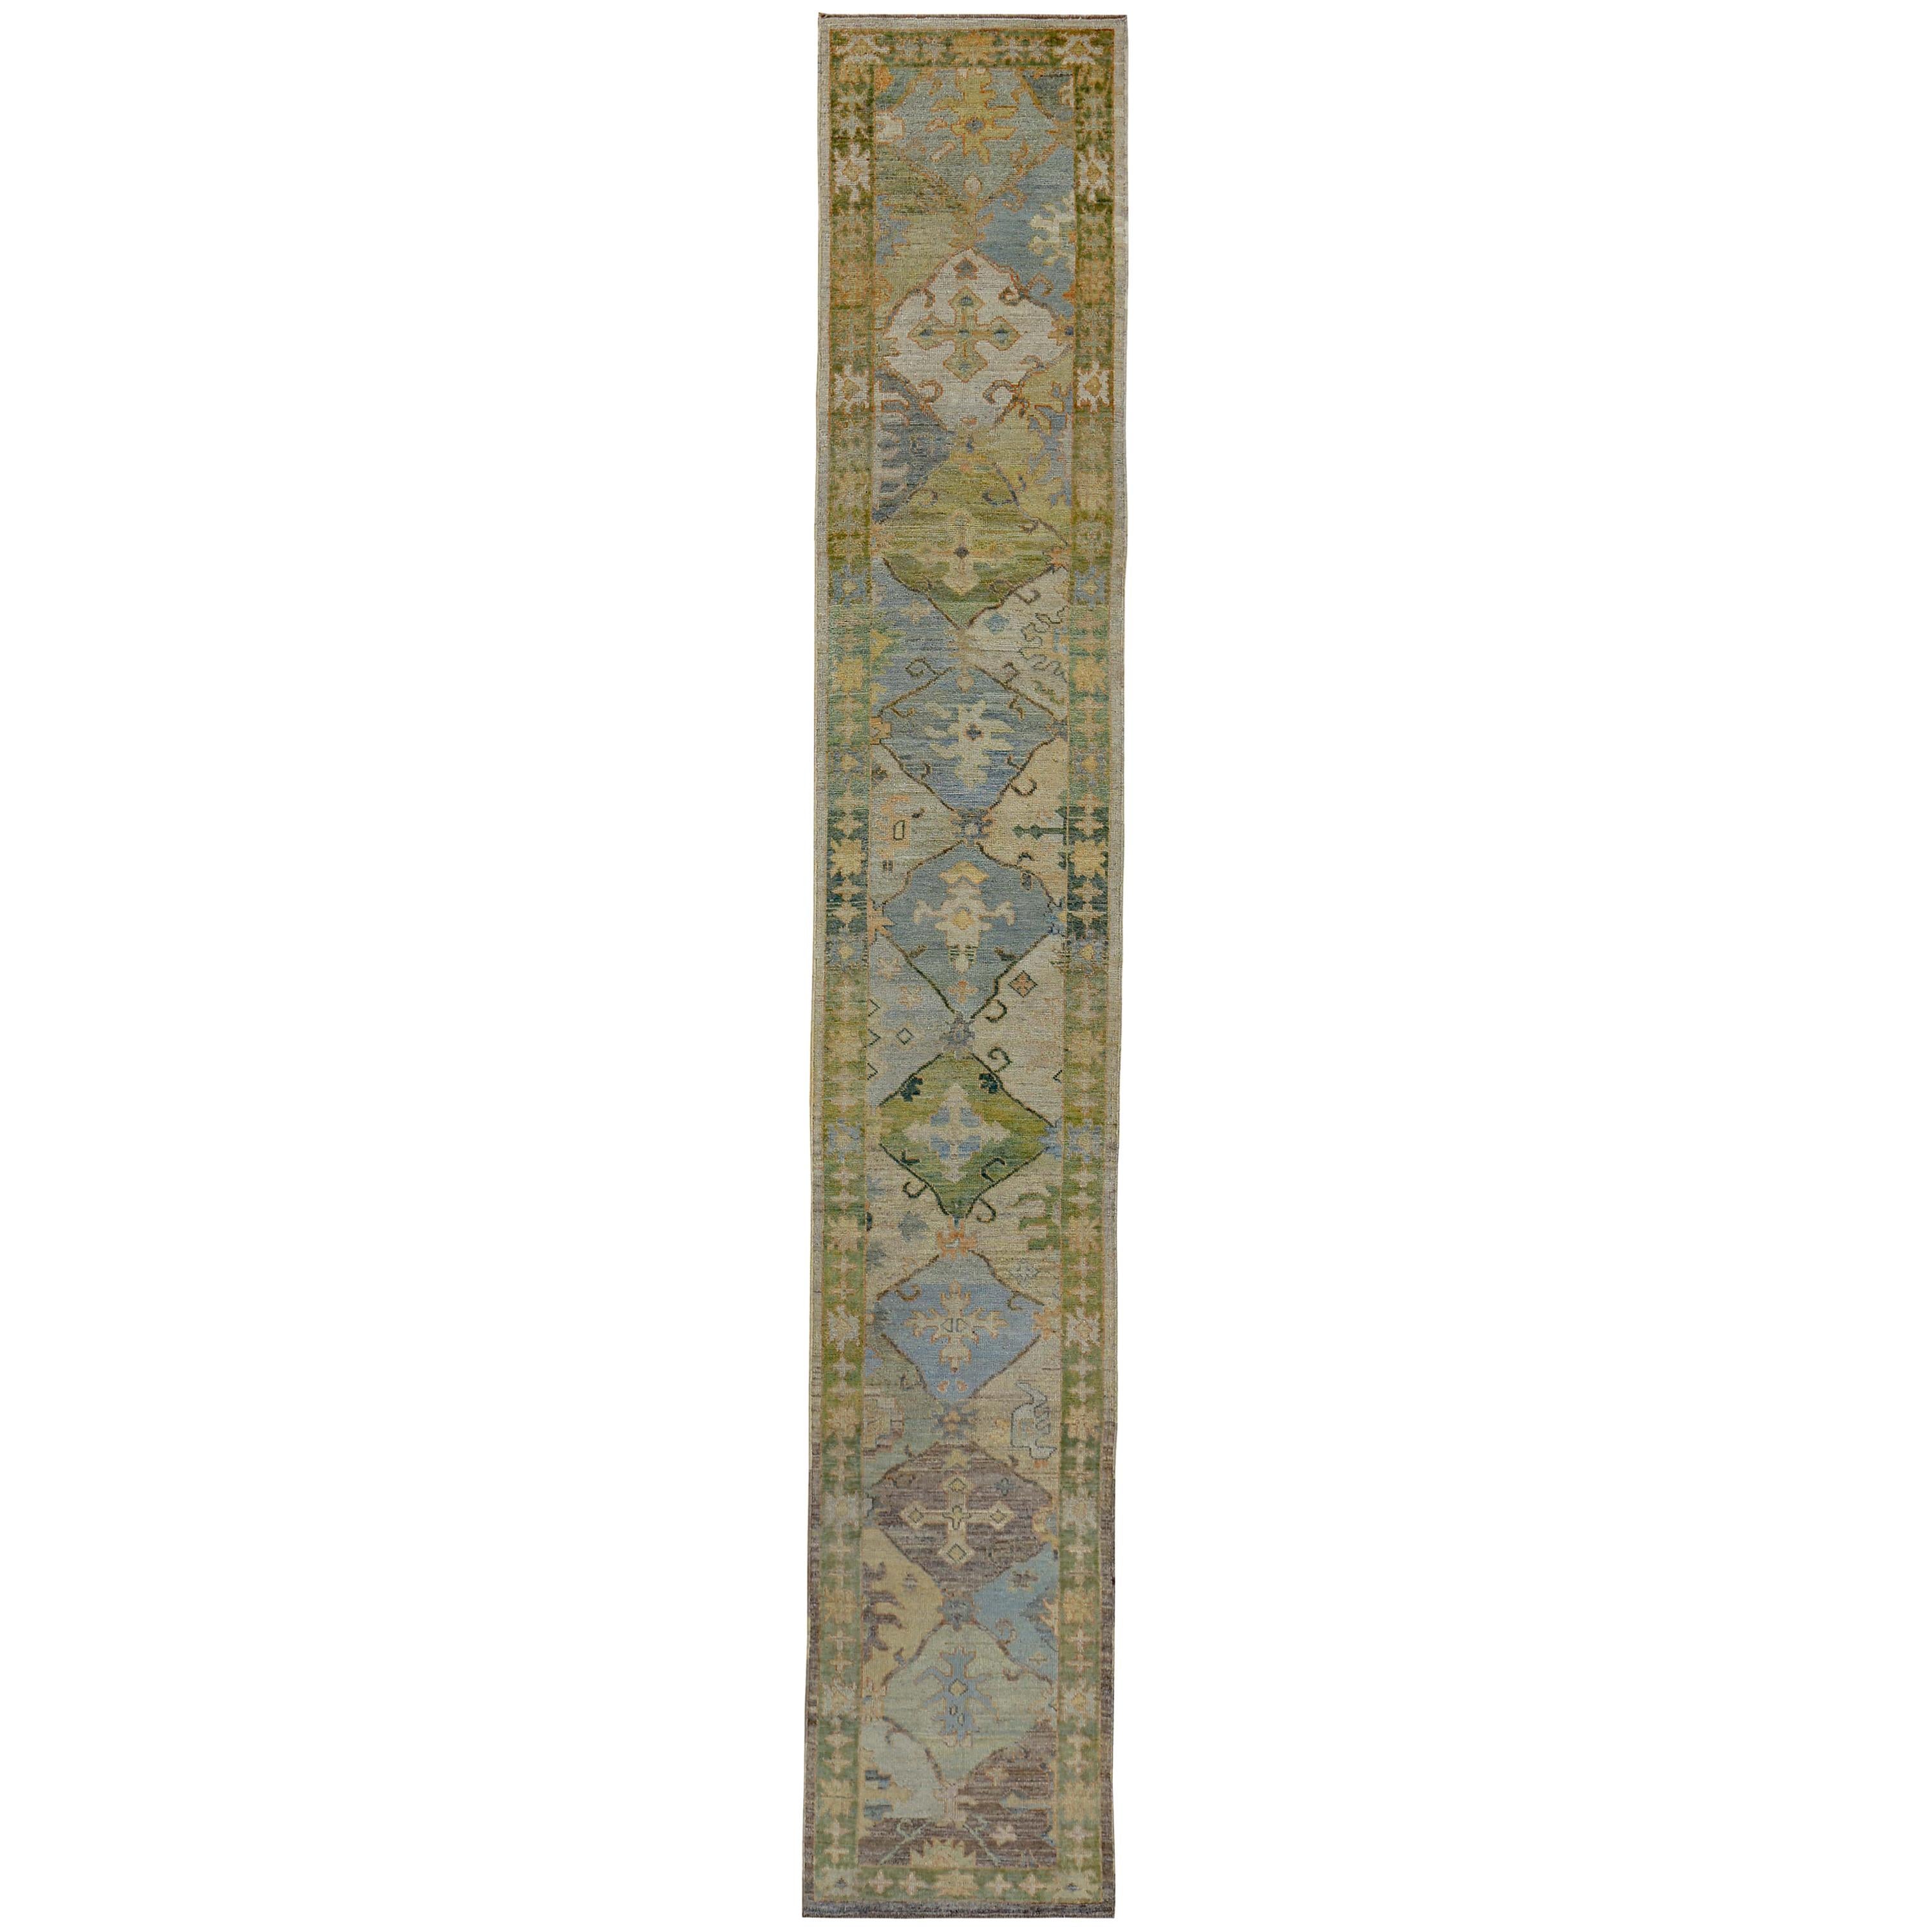 Turkish Oushak Runner Rug with Blue Floral Patterns on Brown and Green Field For Sale